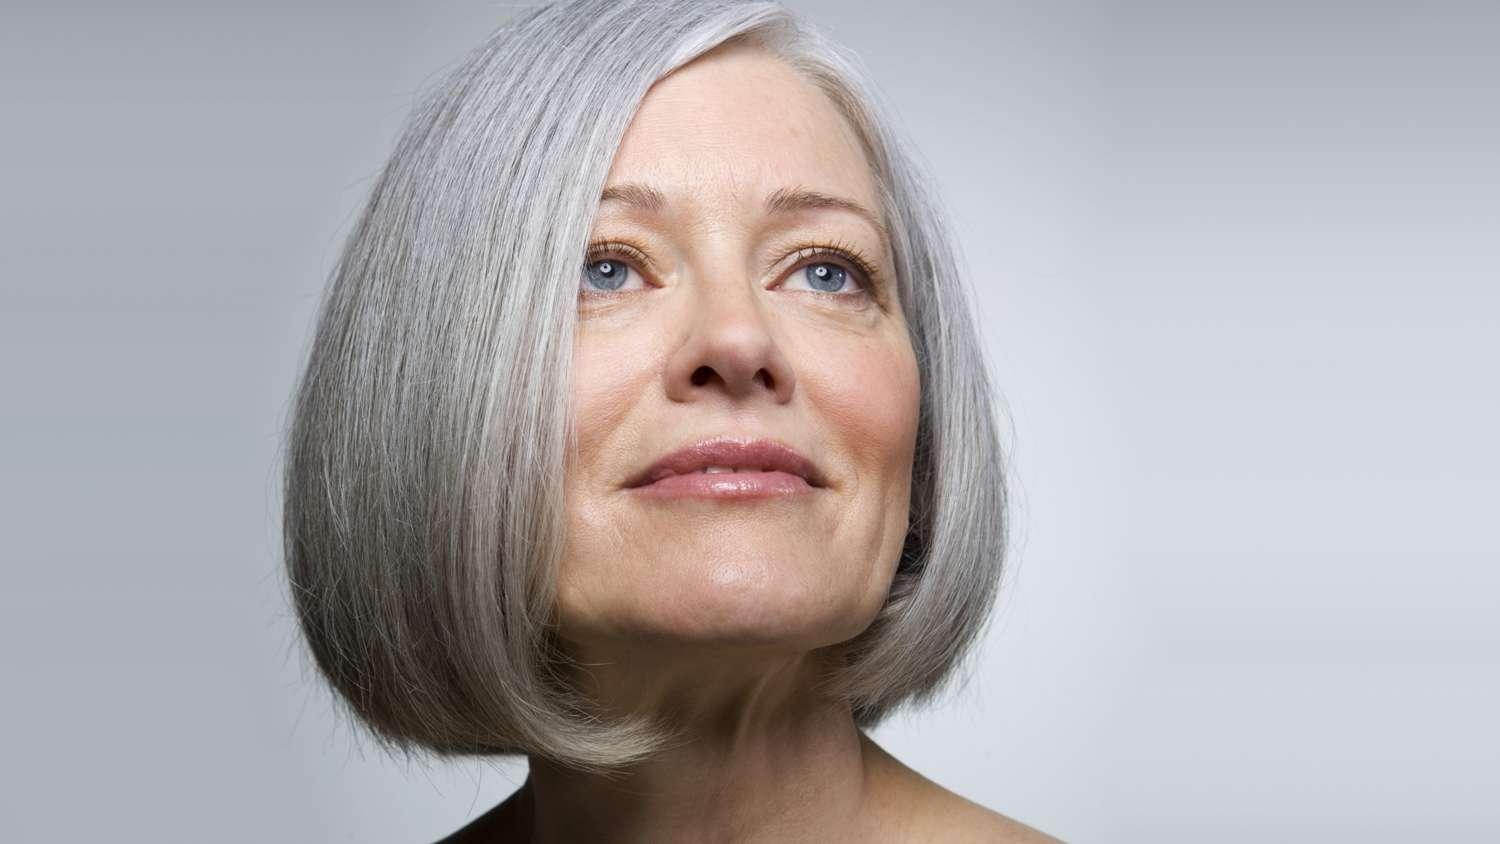 50 Glamorous Hairstyles & Haircuts for Women over 60 | Inverted bob haircuts,  Angled bob haircuts, Blonde inverted bob